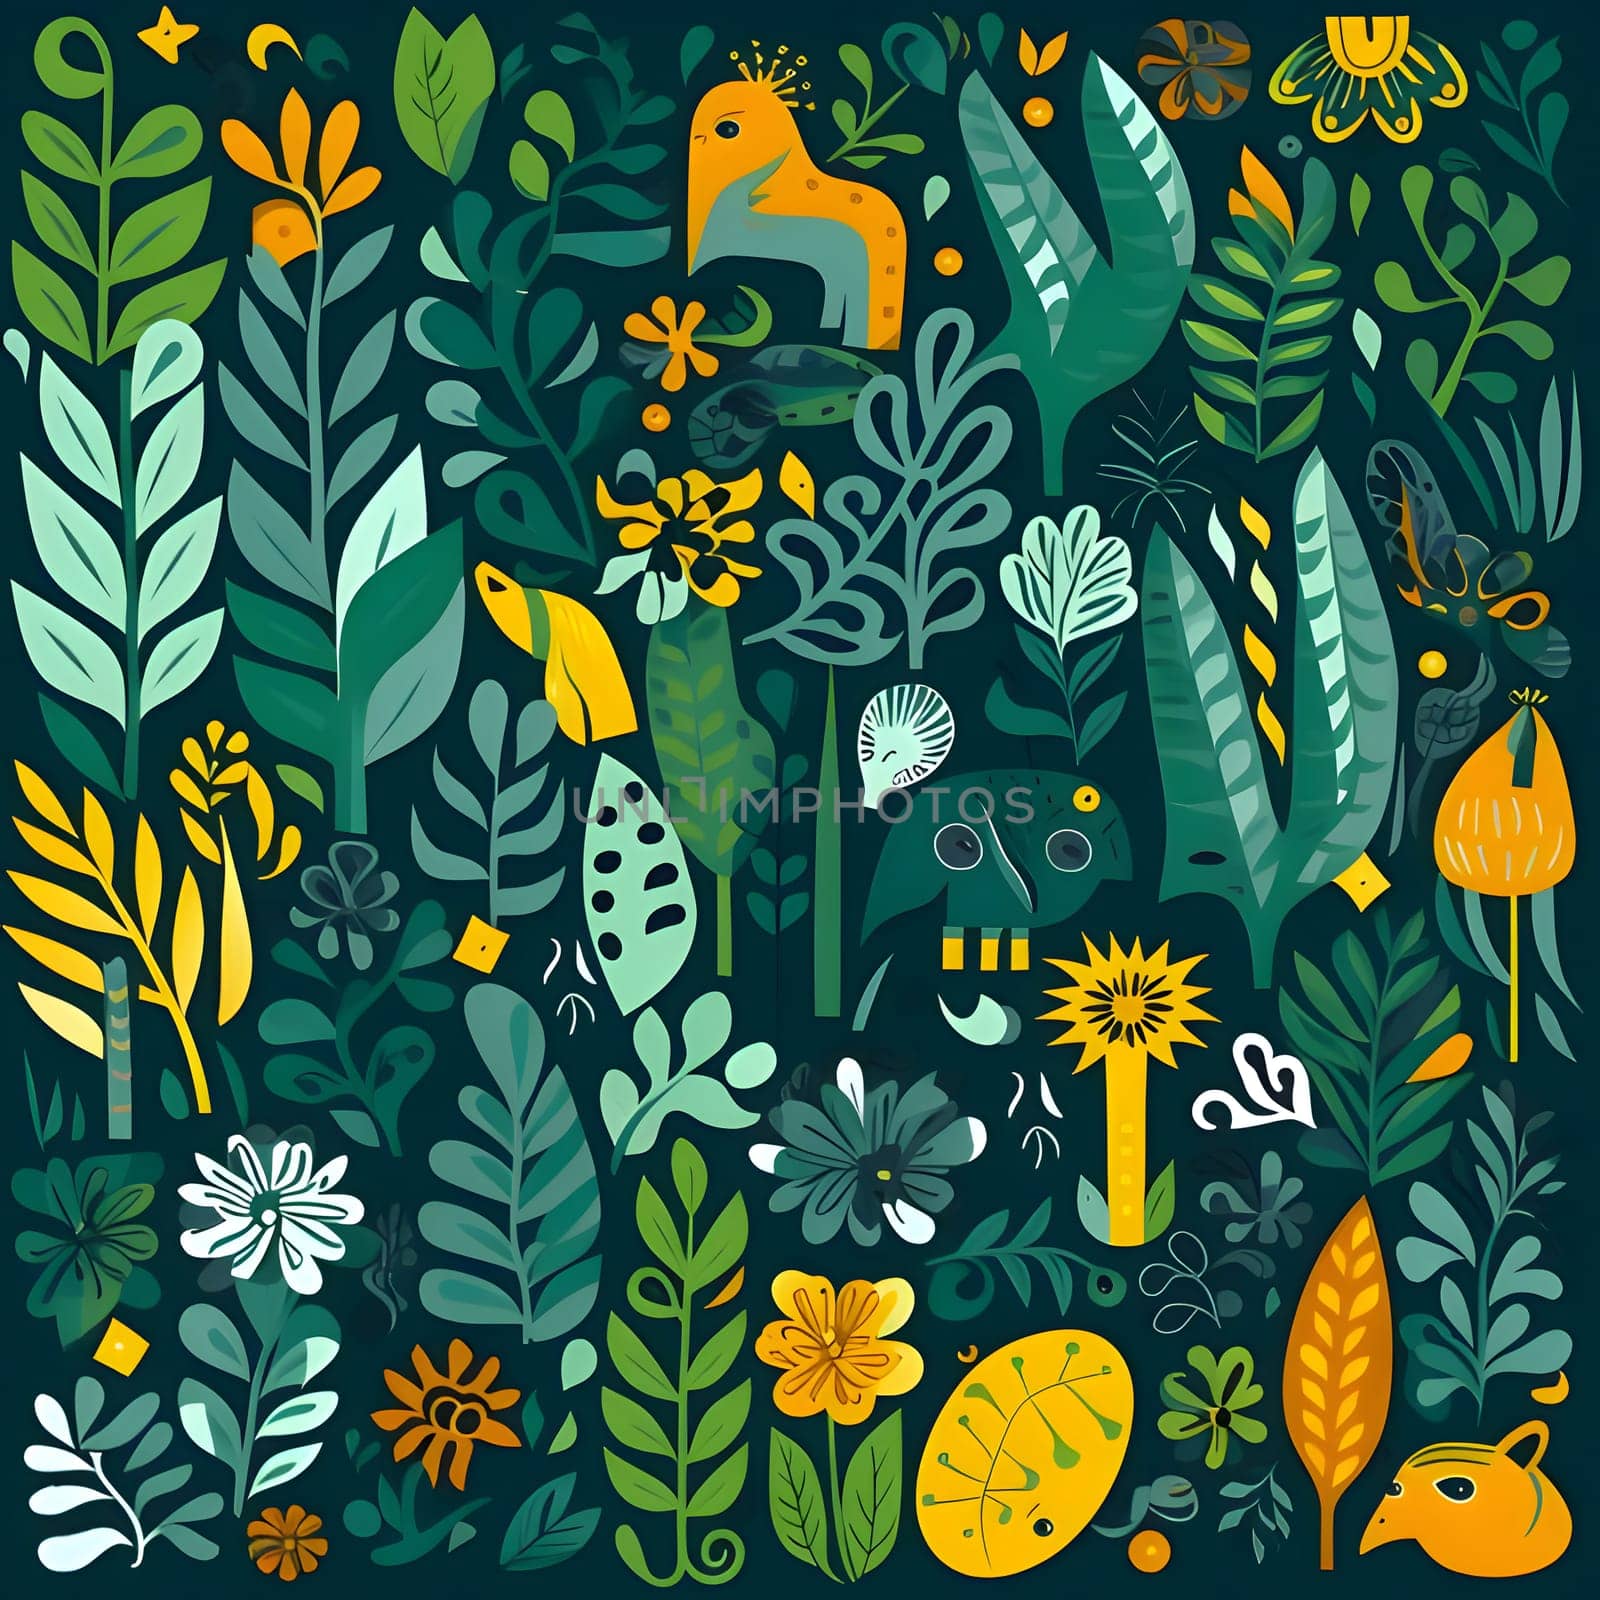 Patterns and banners backgrounds: Tropical seamless pattern. Vector illustration in flat style with exotic plants.